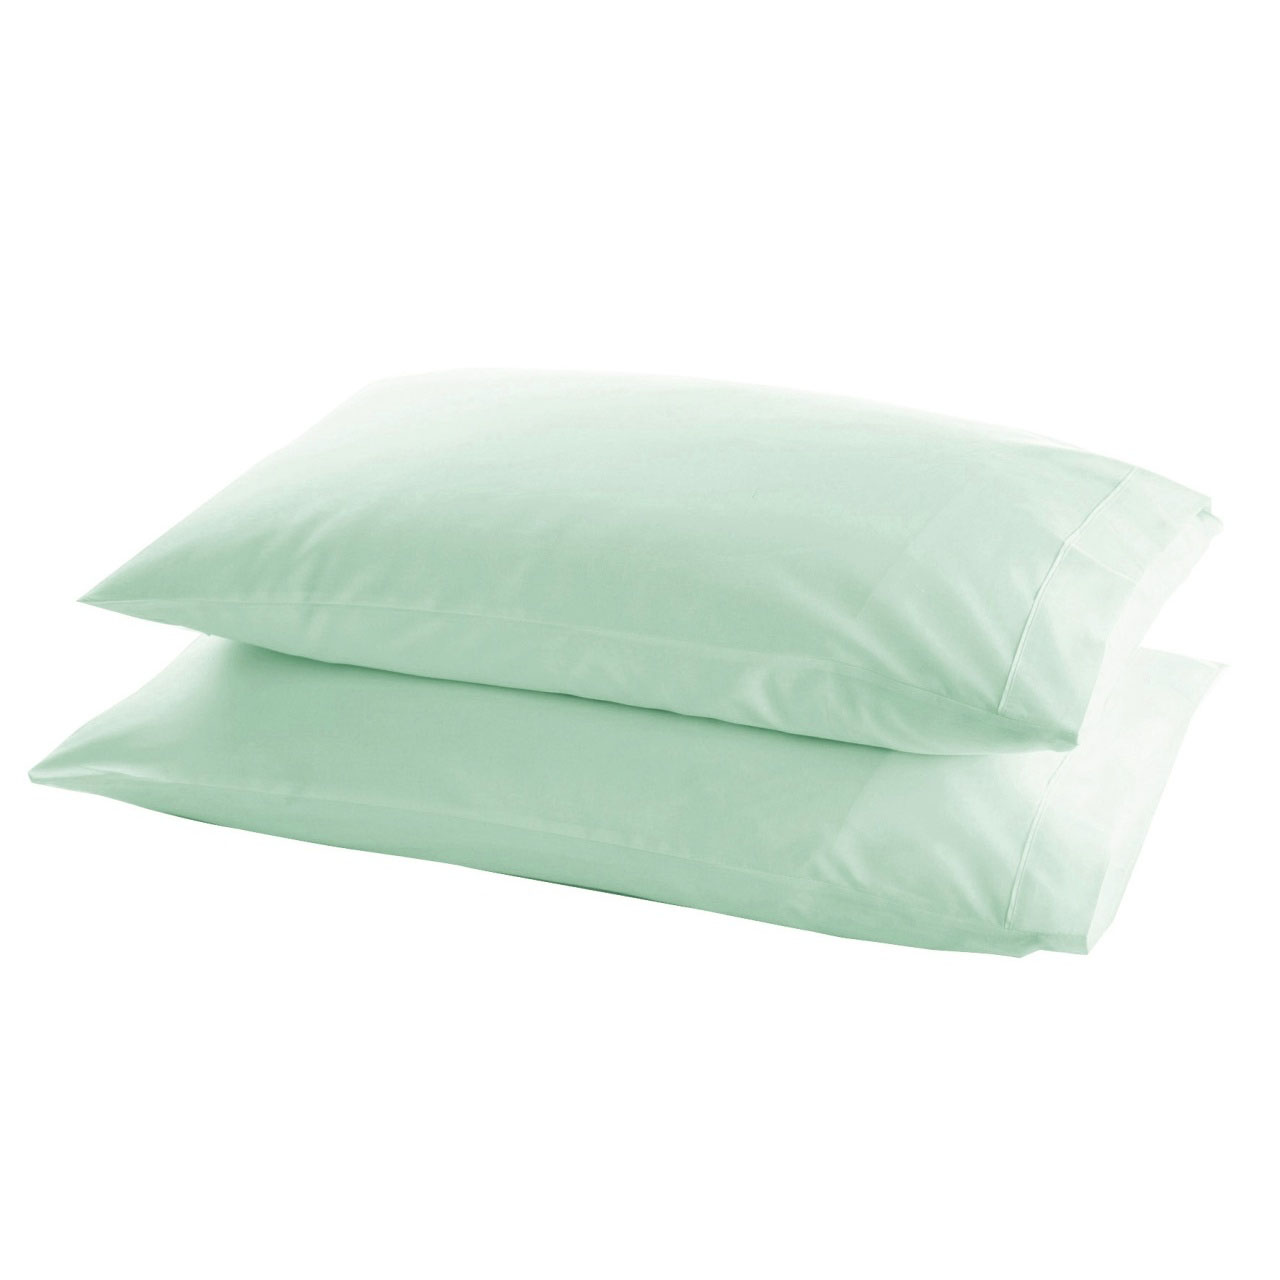 200 Thread Count Egyptian Cotton Housewife Pillowcases - Pair